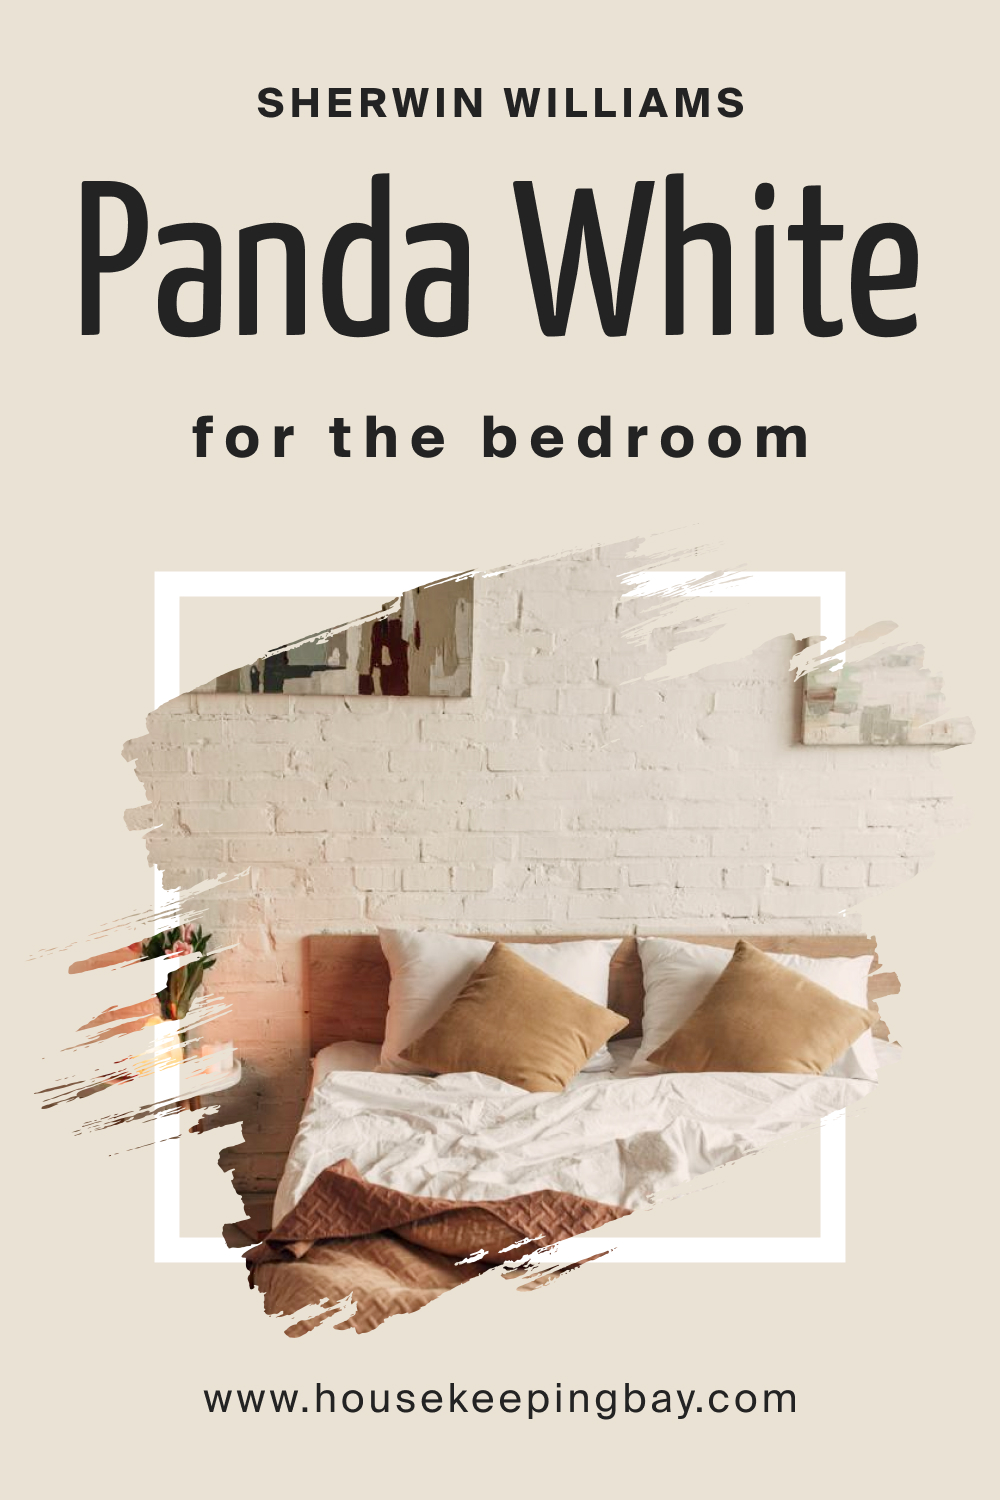 Sherwin Williams. SW Panda WhiteFor the bedroom